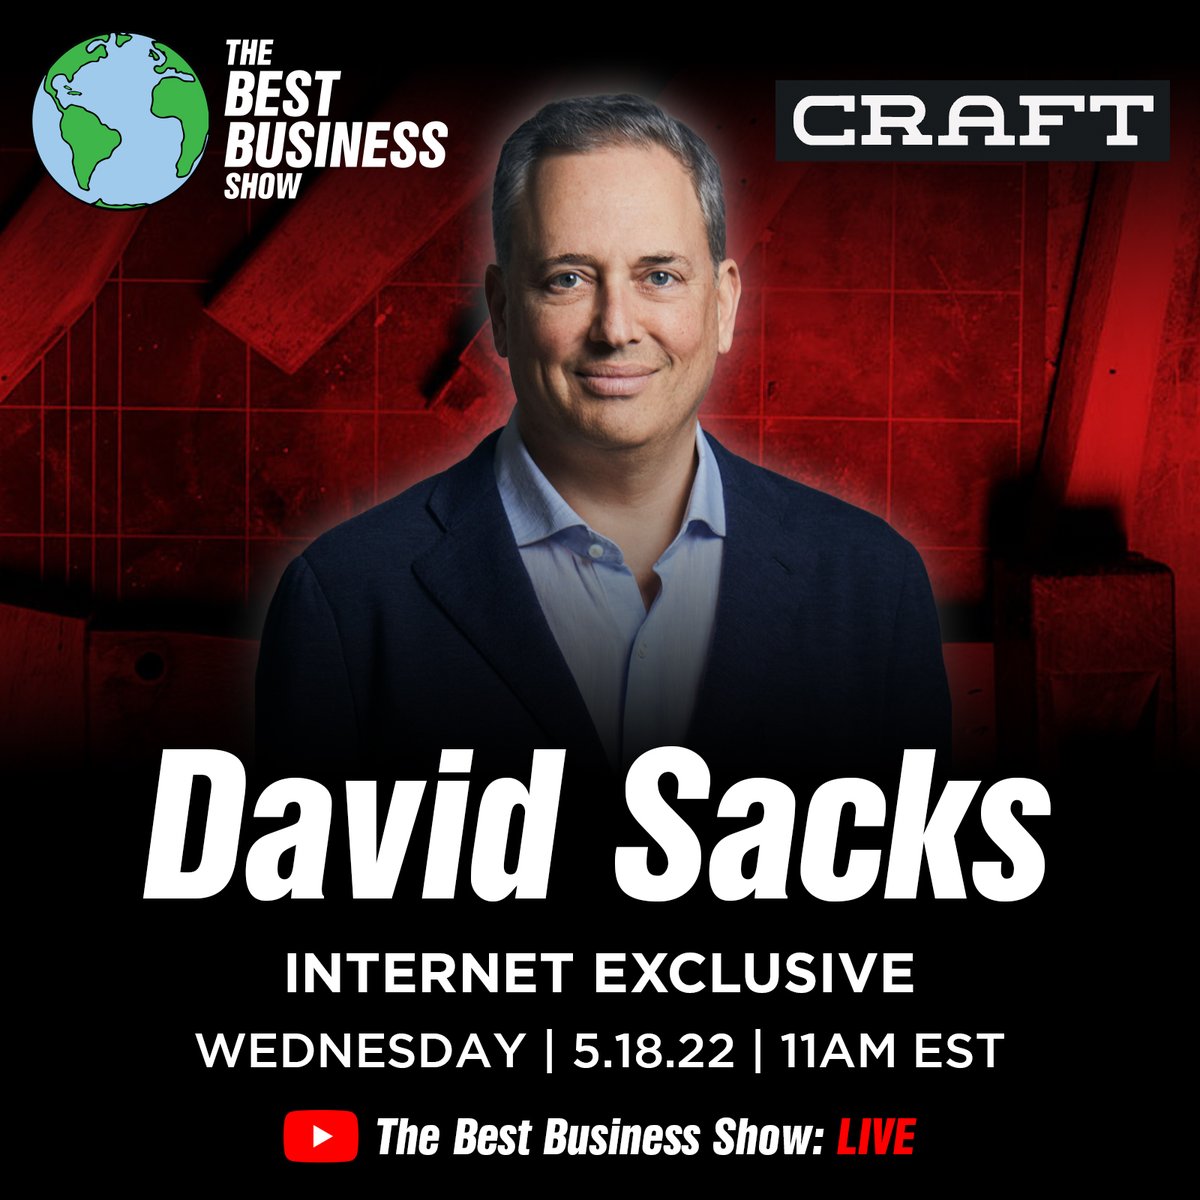 I am talking with @DavidSacks right now for 90 minutes about the state of the world. - Macro environment - Advice to founders - Free speech - Bitcoin - Investing lessons - Importance of tech industry WATCH: youtu.be/VuA6g92Biak